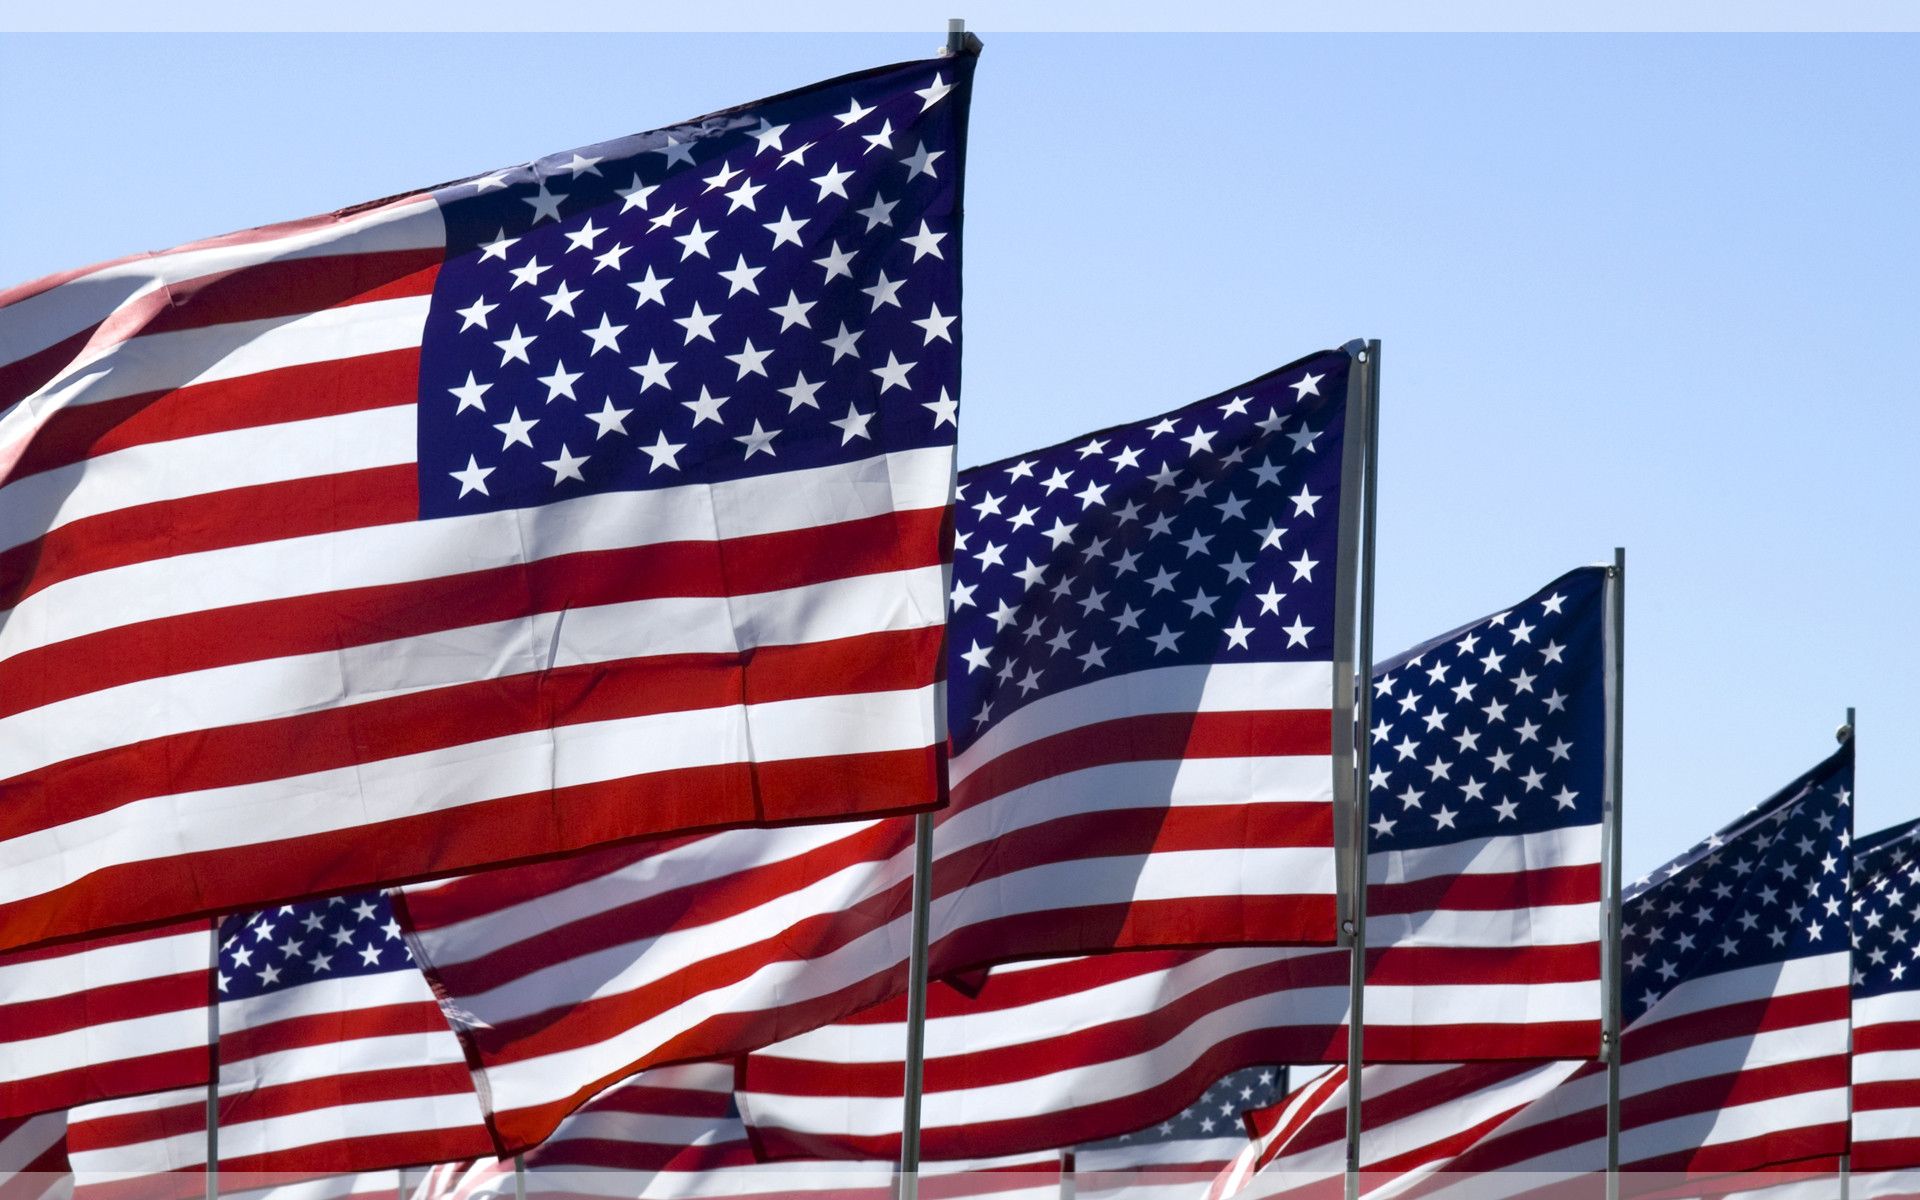 Memorial Day Images Free Download - Memorial Day Backgrounds - HD Wallpaper 